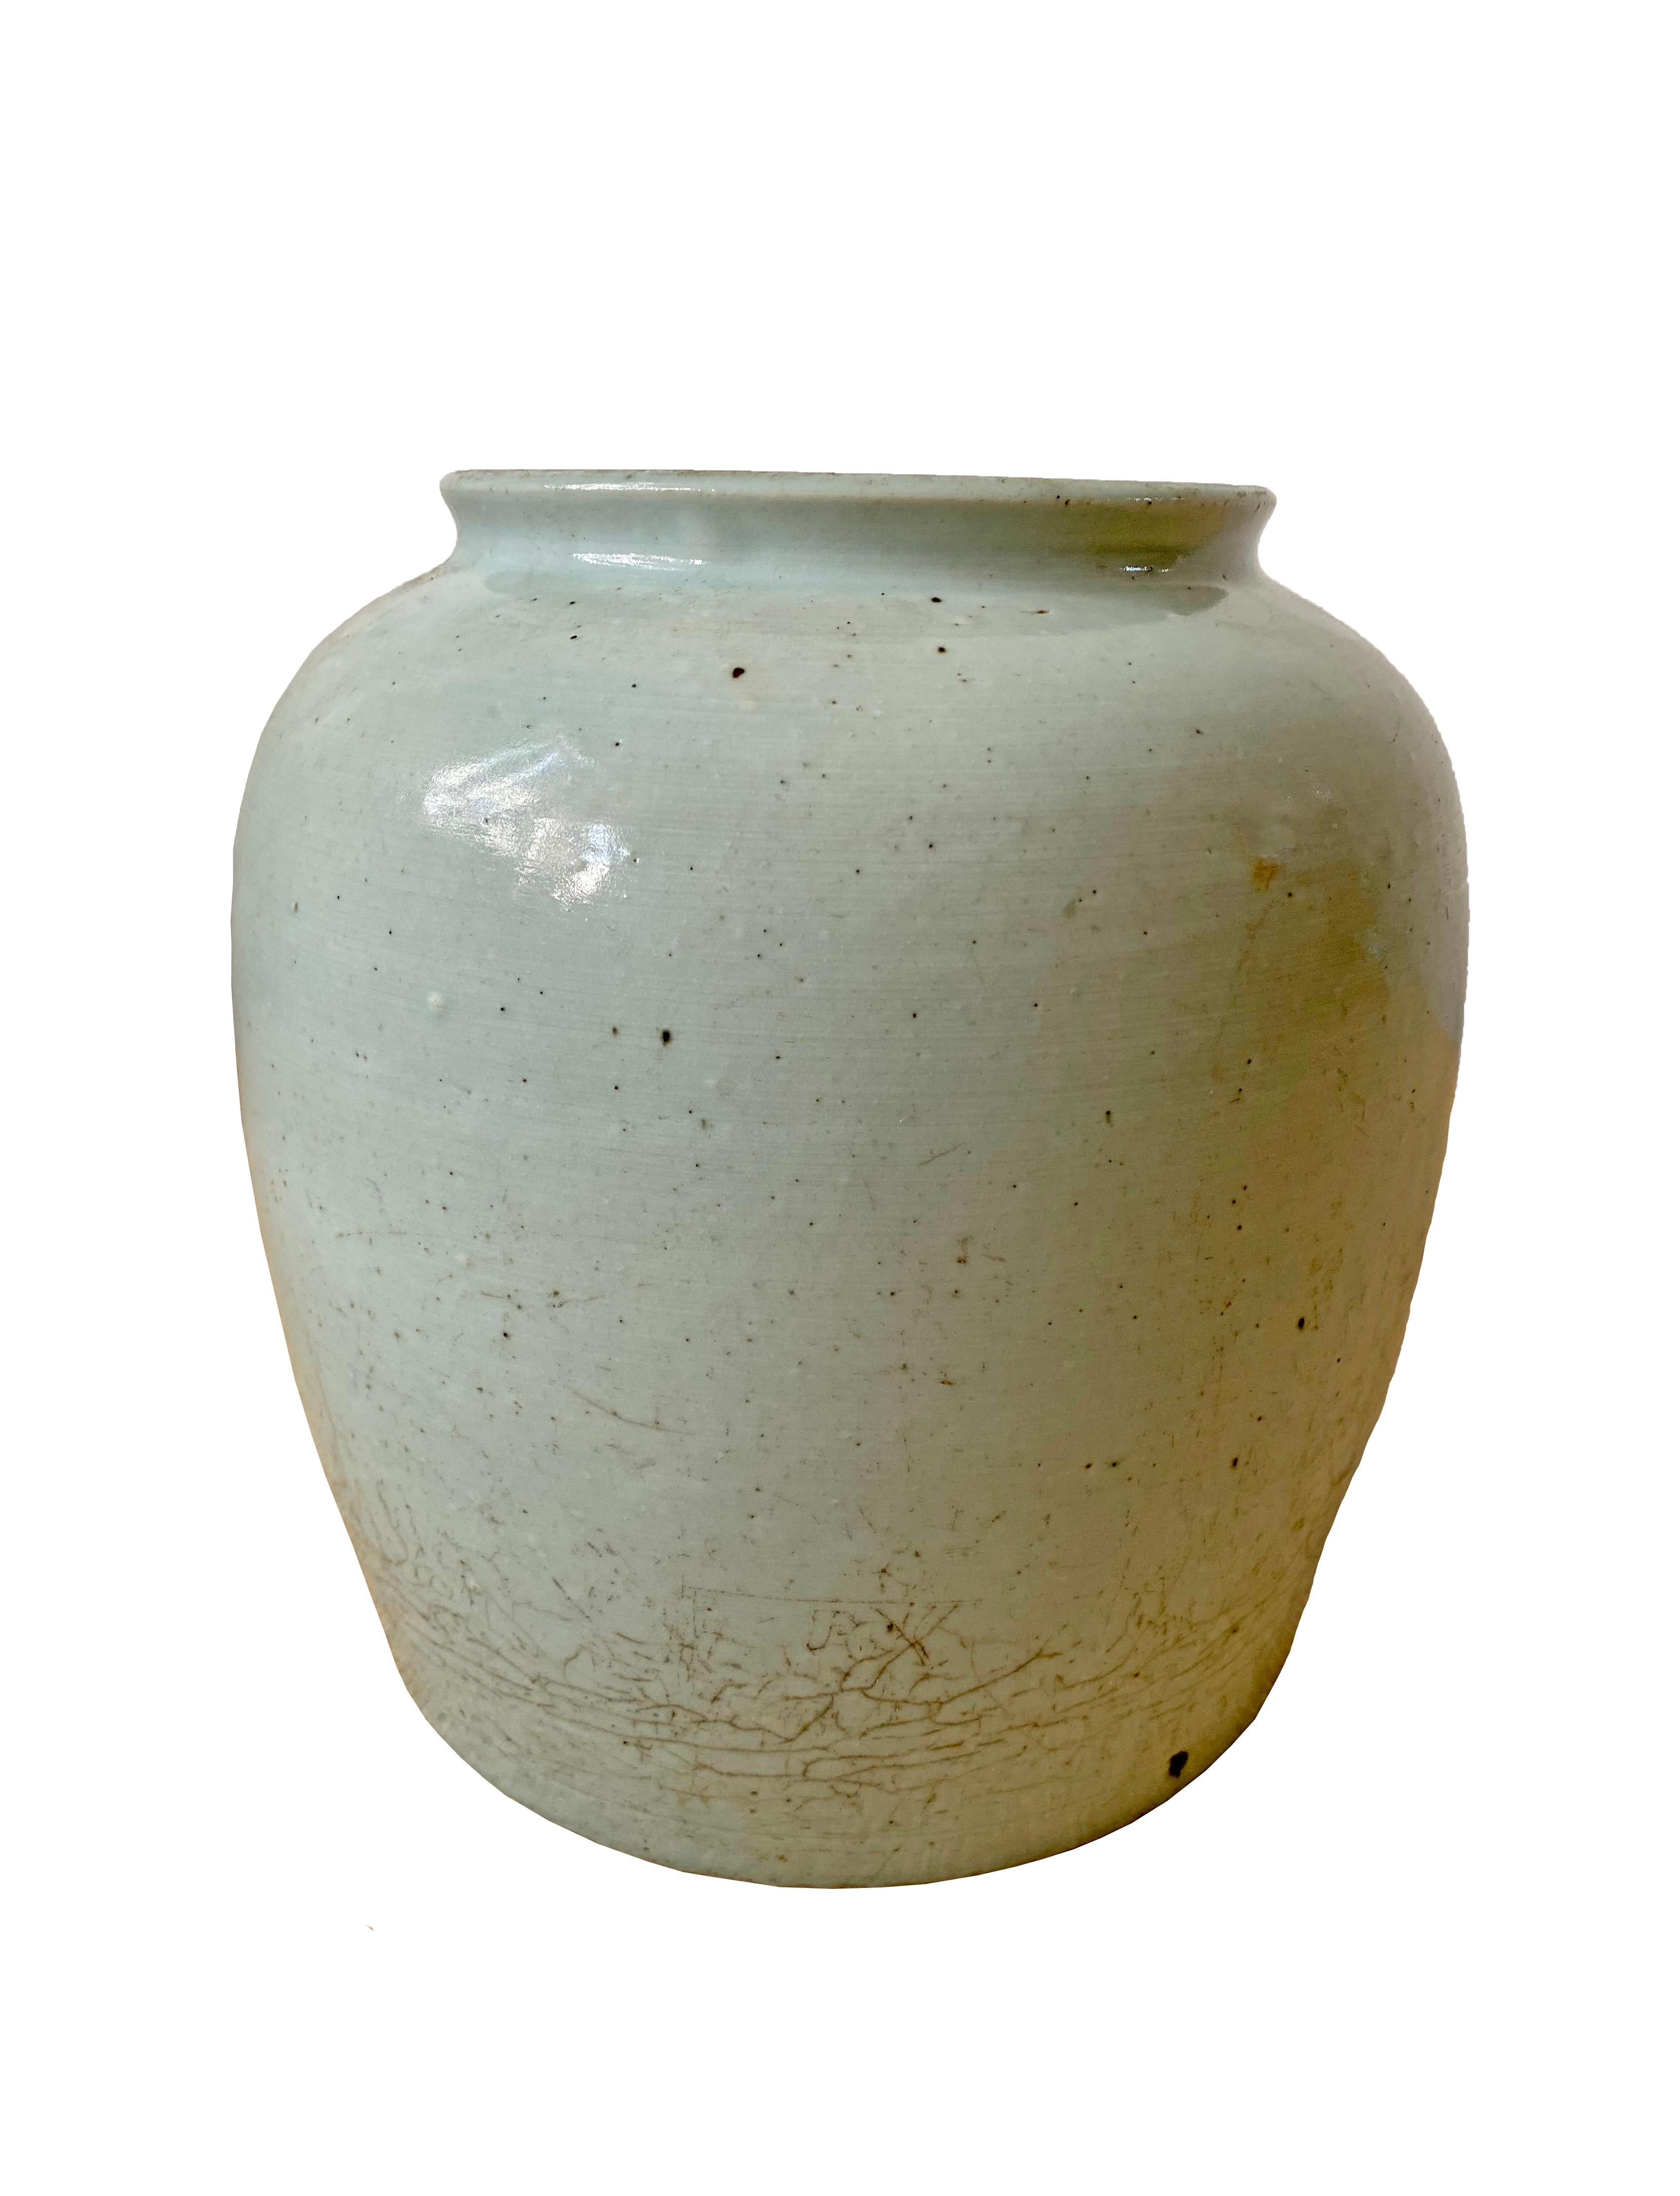 Other Chinese Ceramic Pot 'Longquan celadon', Early 20th Century